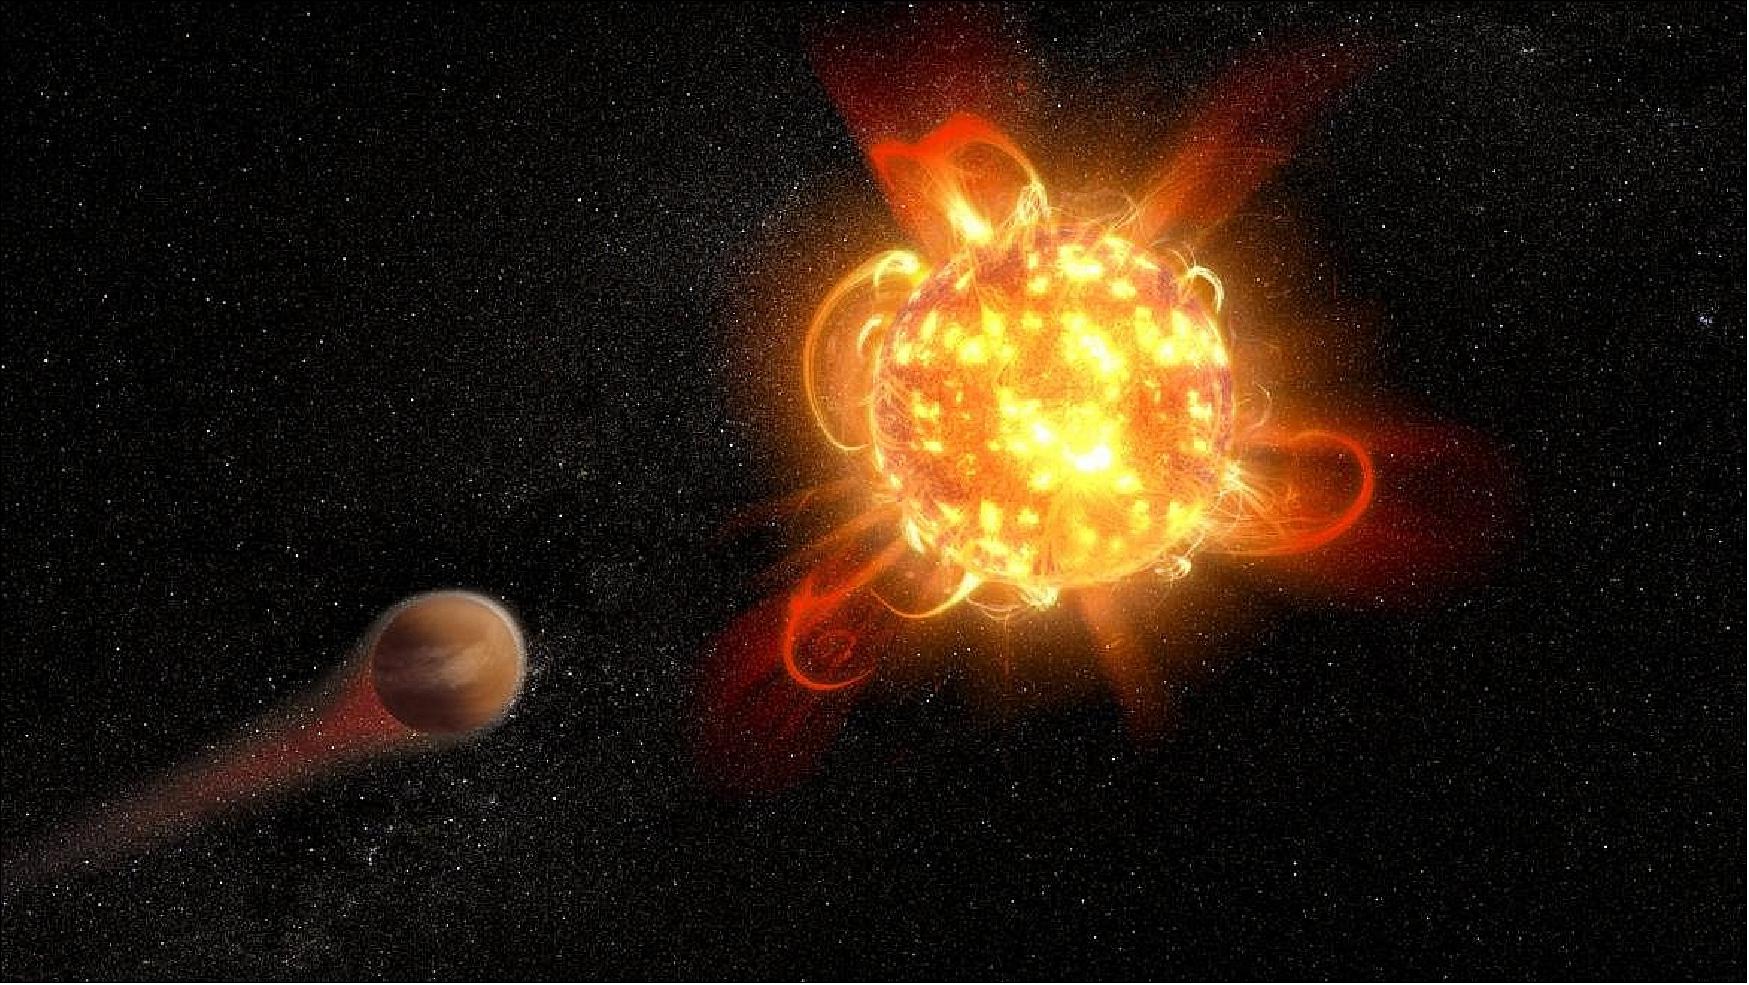 Figure 15: Violent outbursts of seething gas from young red dwarfs may make conditions uninhabitable on fledgling planets. In this artist's rendering, an active, young red dwarf (right) is stripping the atmosphere from an orbiting planet (left). ASU astronomers have found that flares from the youngest red dwarfs they surveyed — approximately 40 million years old — are 100 to 1000 times more energetic than when the stars are older. They also detected one of the most intense stellar flares ever observed in ultraviolet light — more energetic than the most powerful flare ever recorded from our Sun [image credit: NASA, ESA, and D. Player (STScI)]